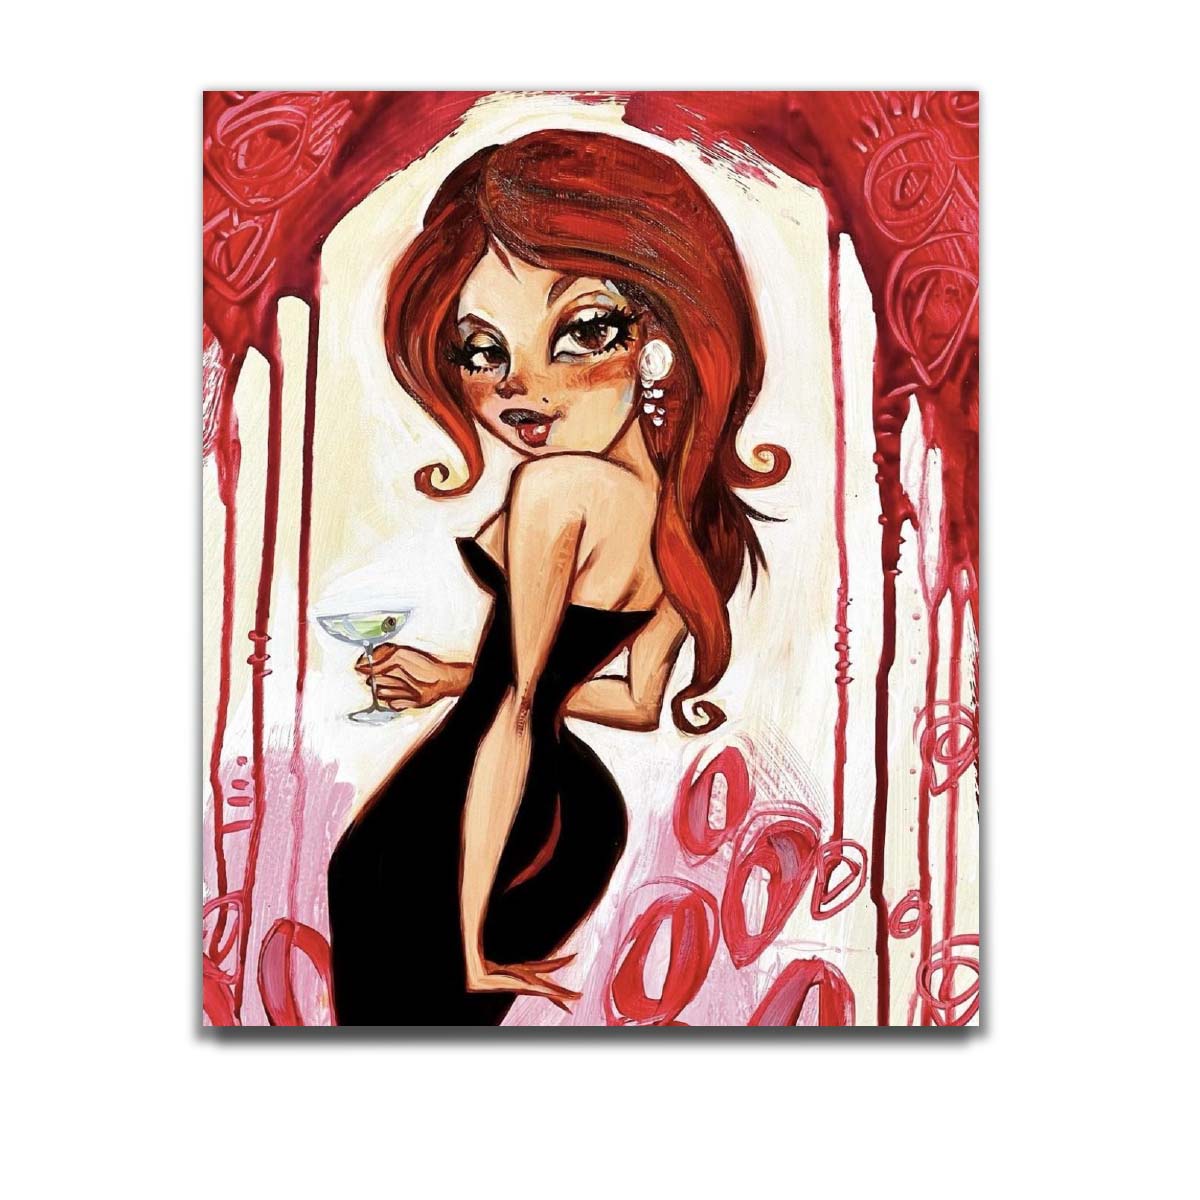 Todd White "Coming Up Roses" Limited Edition Canvas Giclee